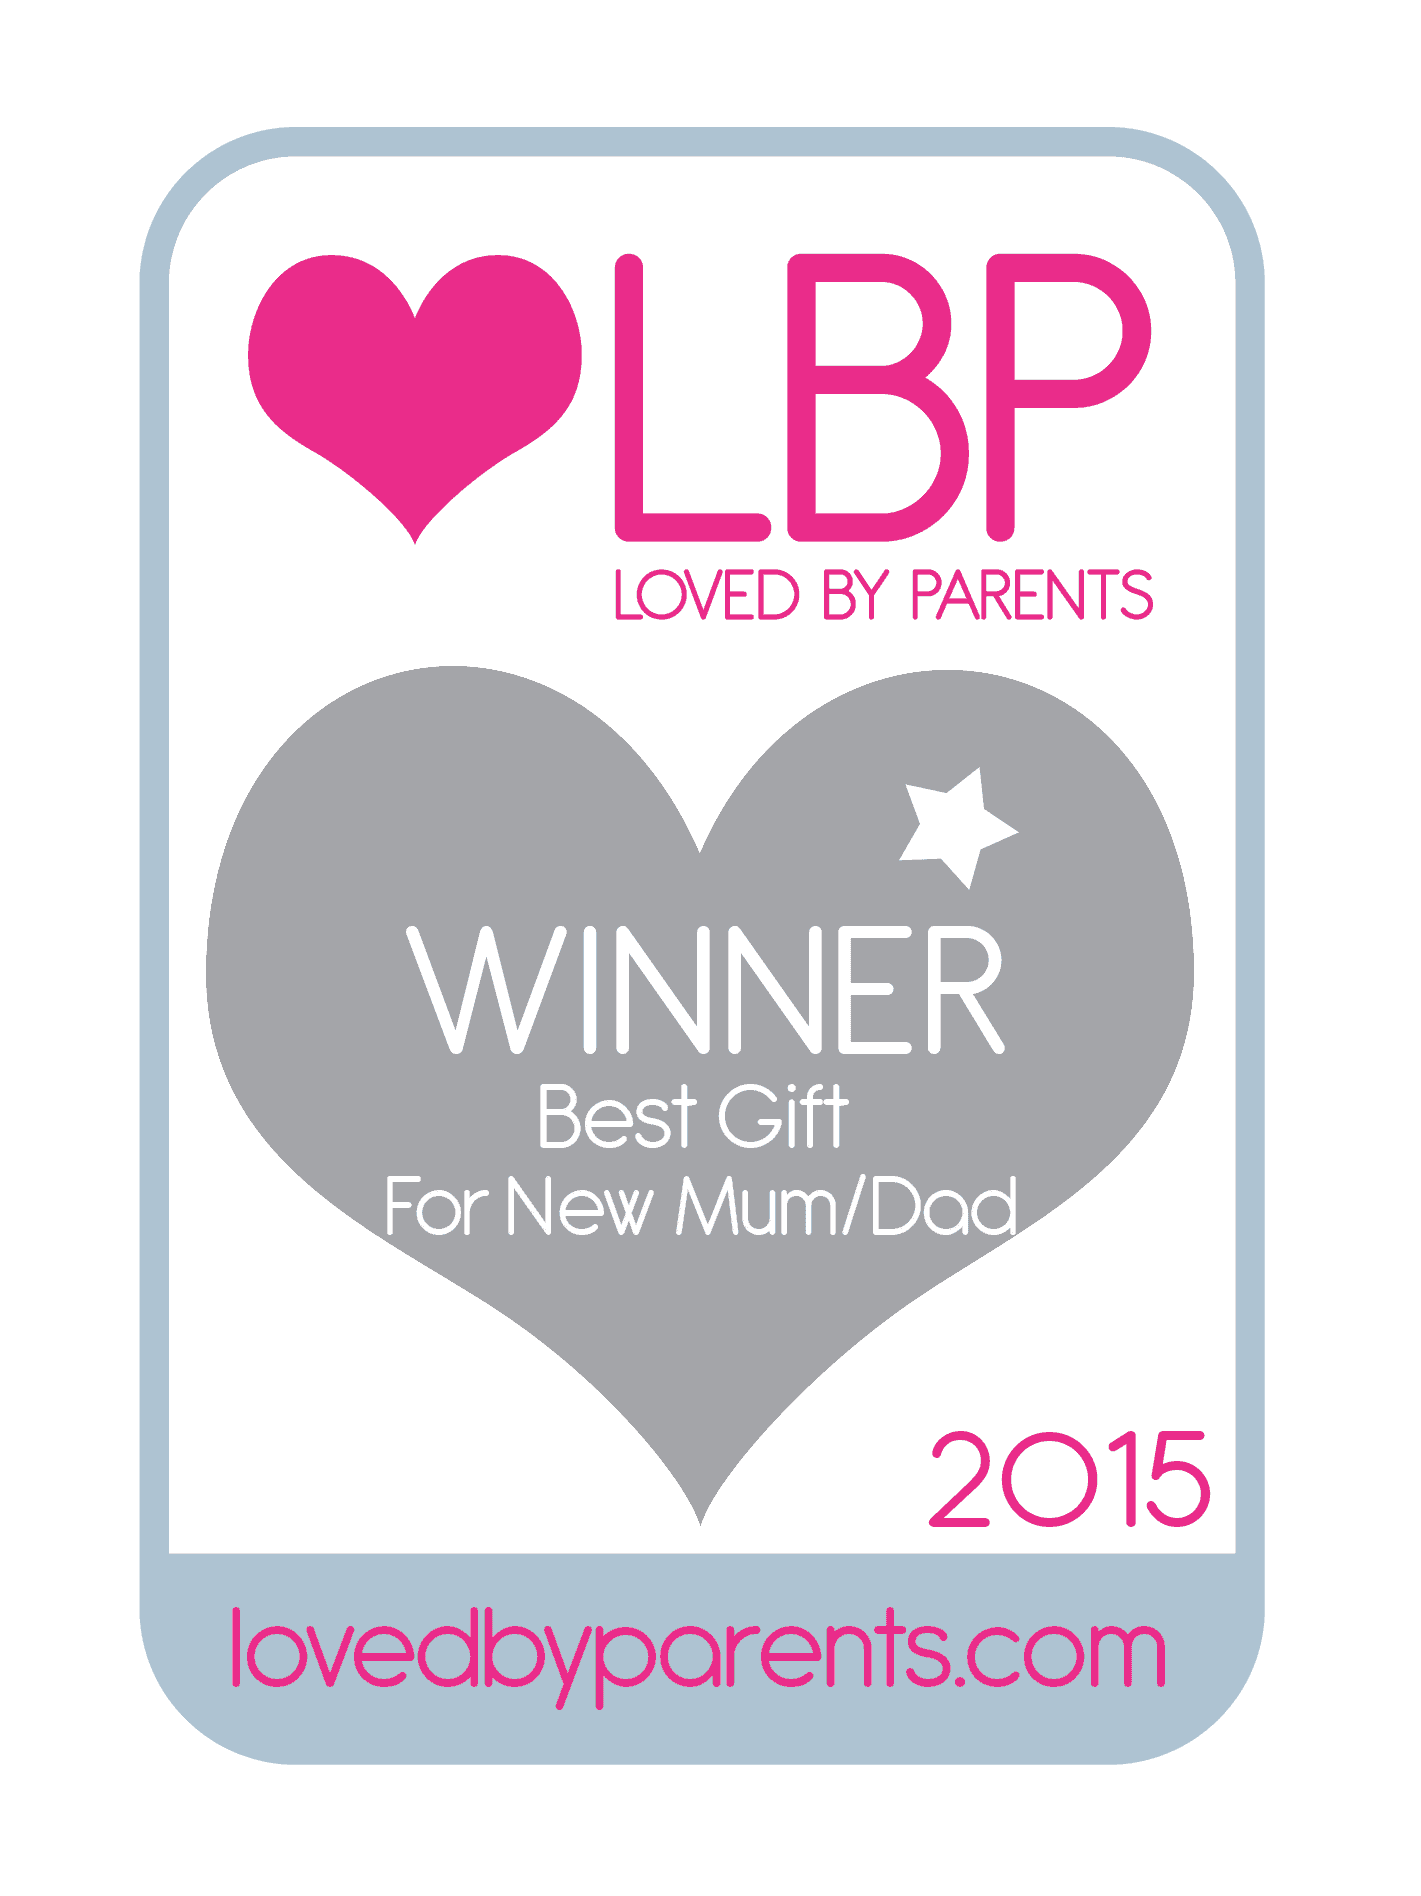 Loved by Parents Silver Award